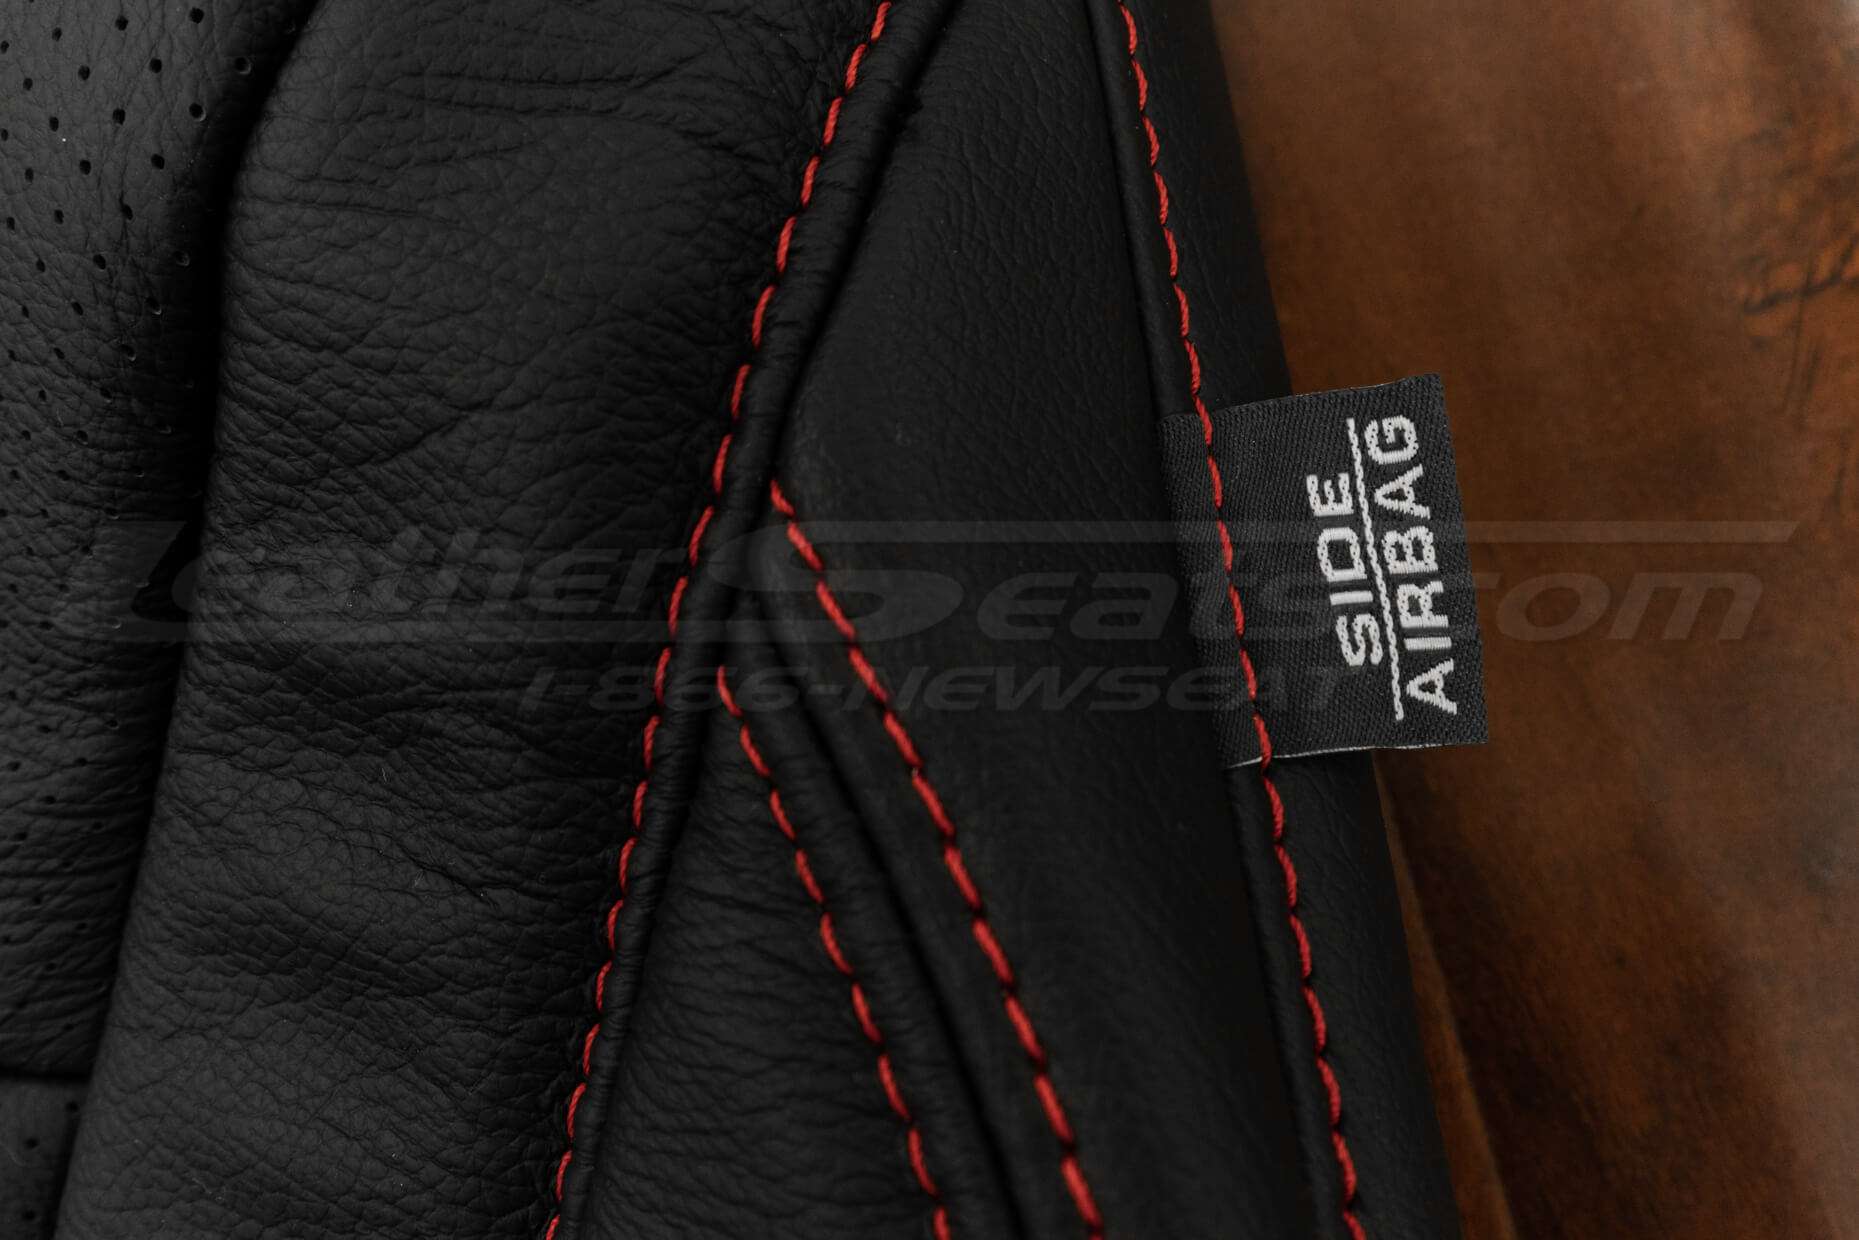 Side airbag tag with Bright red stitching